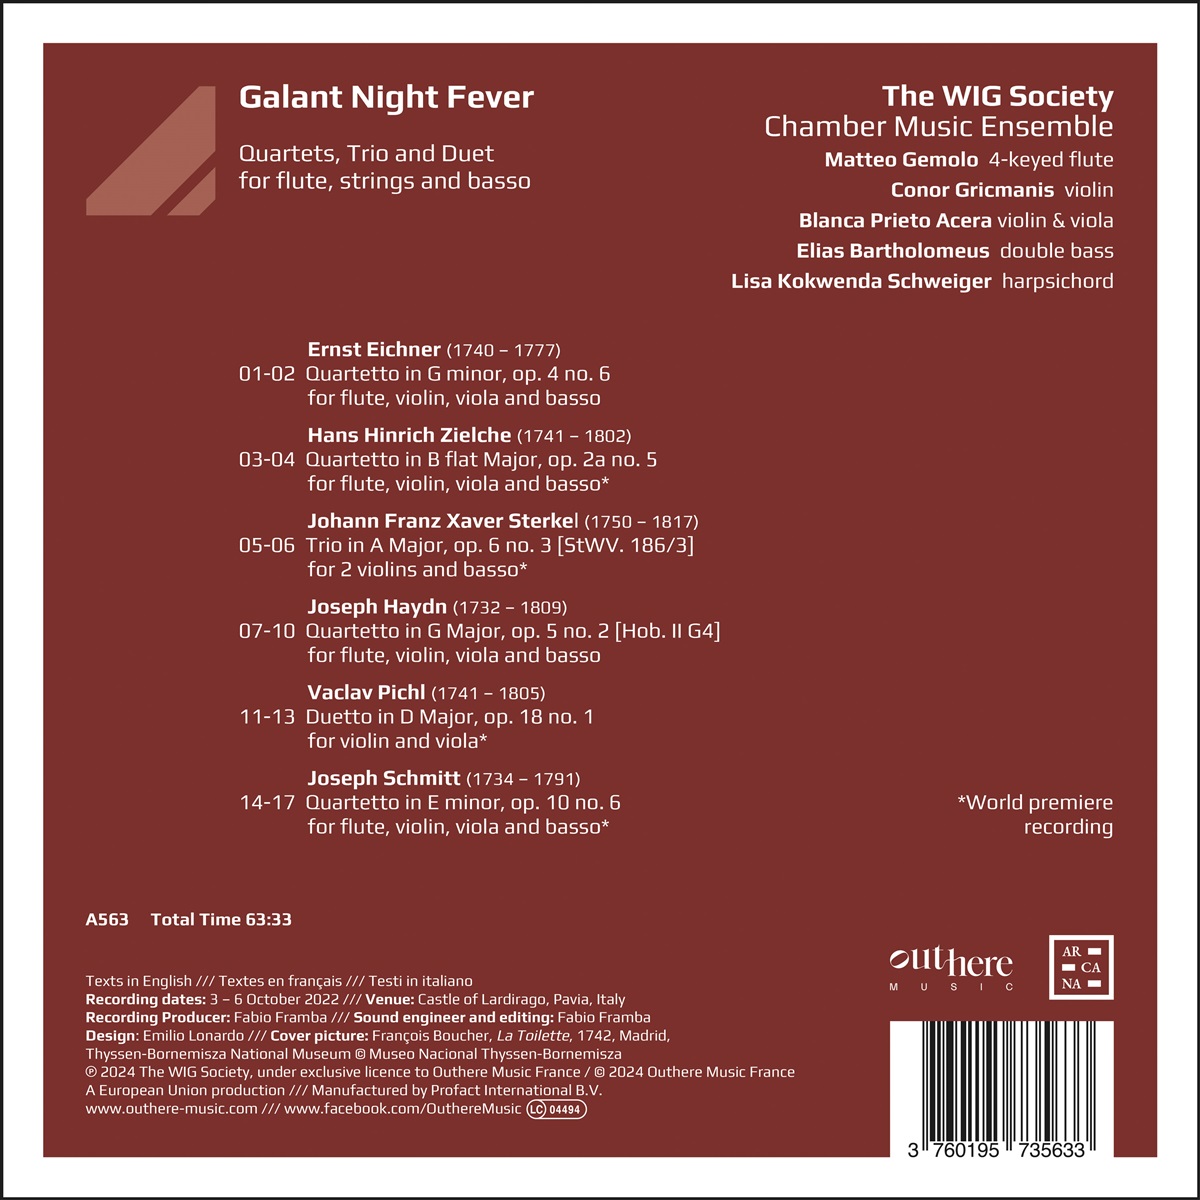 The Wig Society Chamber Music Ensemble 플루트와 현악을 위한 실내악 (Galant Night Fever. Quartets, Trio and Duet For Flute, Strings and Basso)